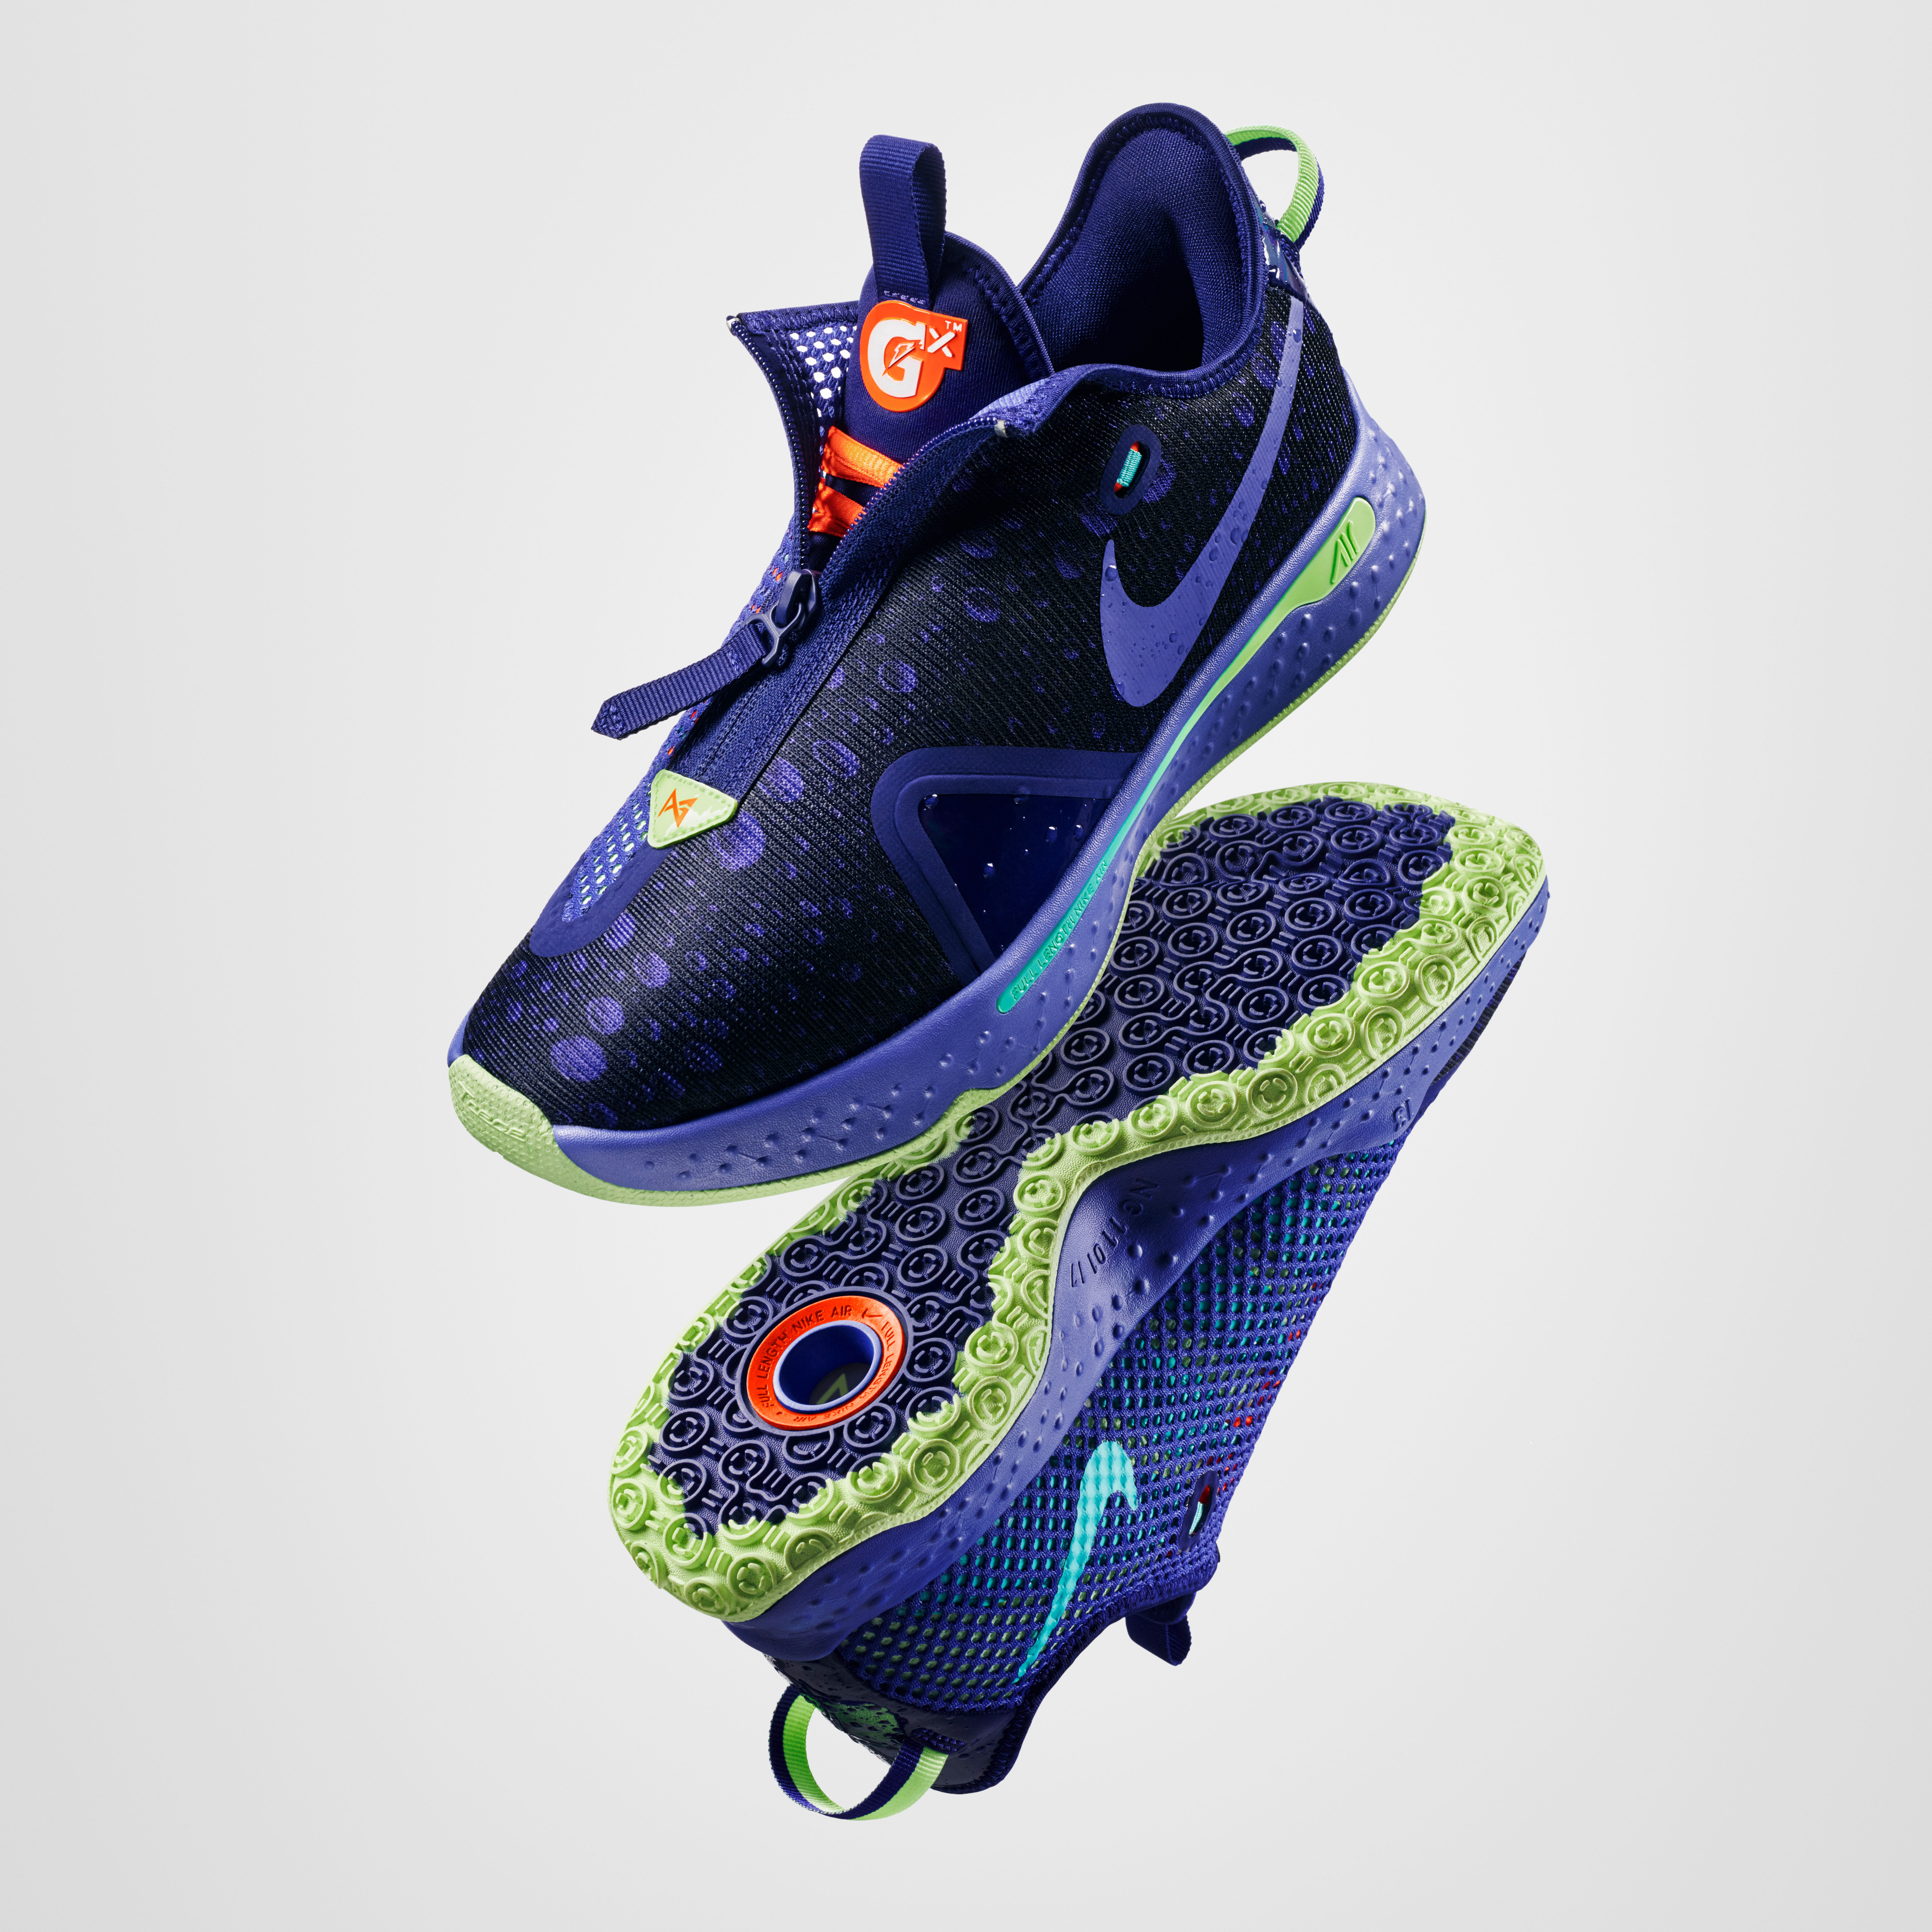 Achievable Fee meet Nike & Gatorade Partner With Paul George on New PG4 Collaboration